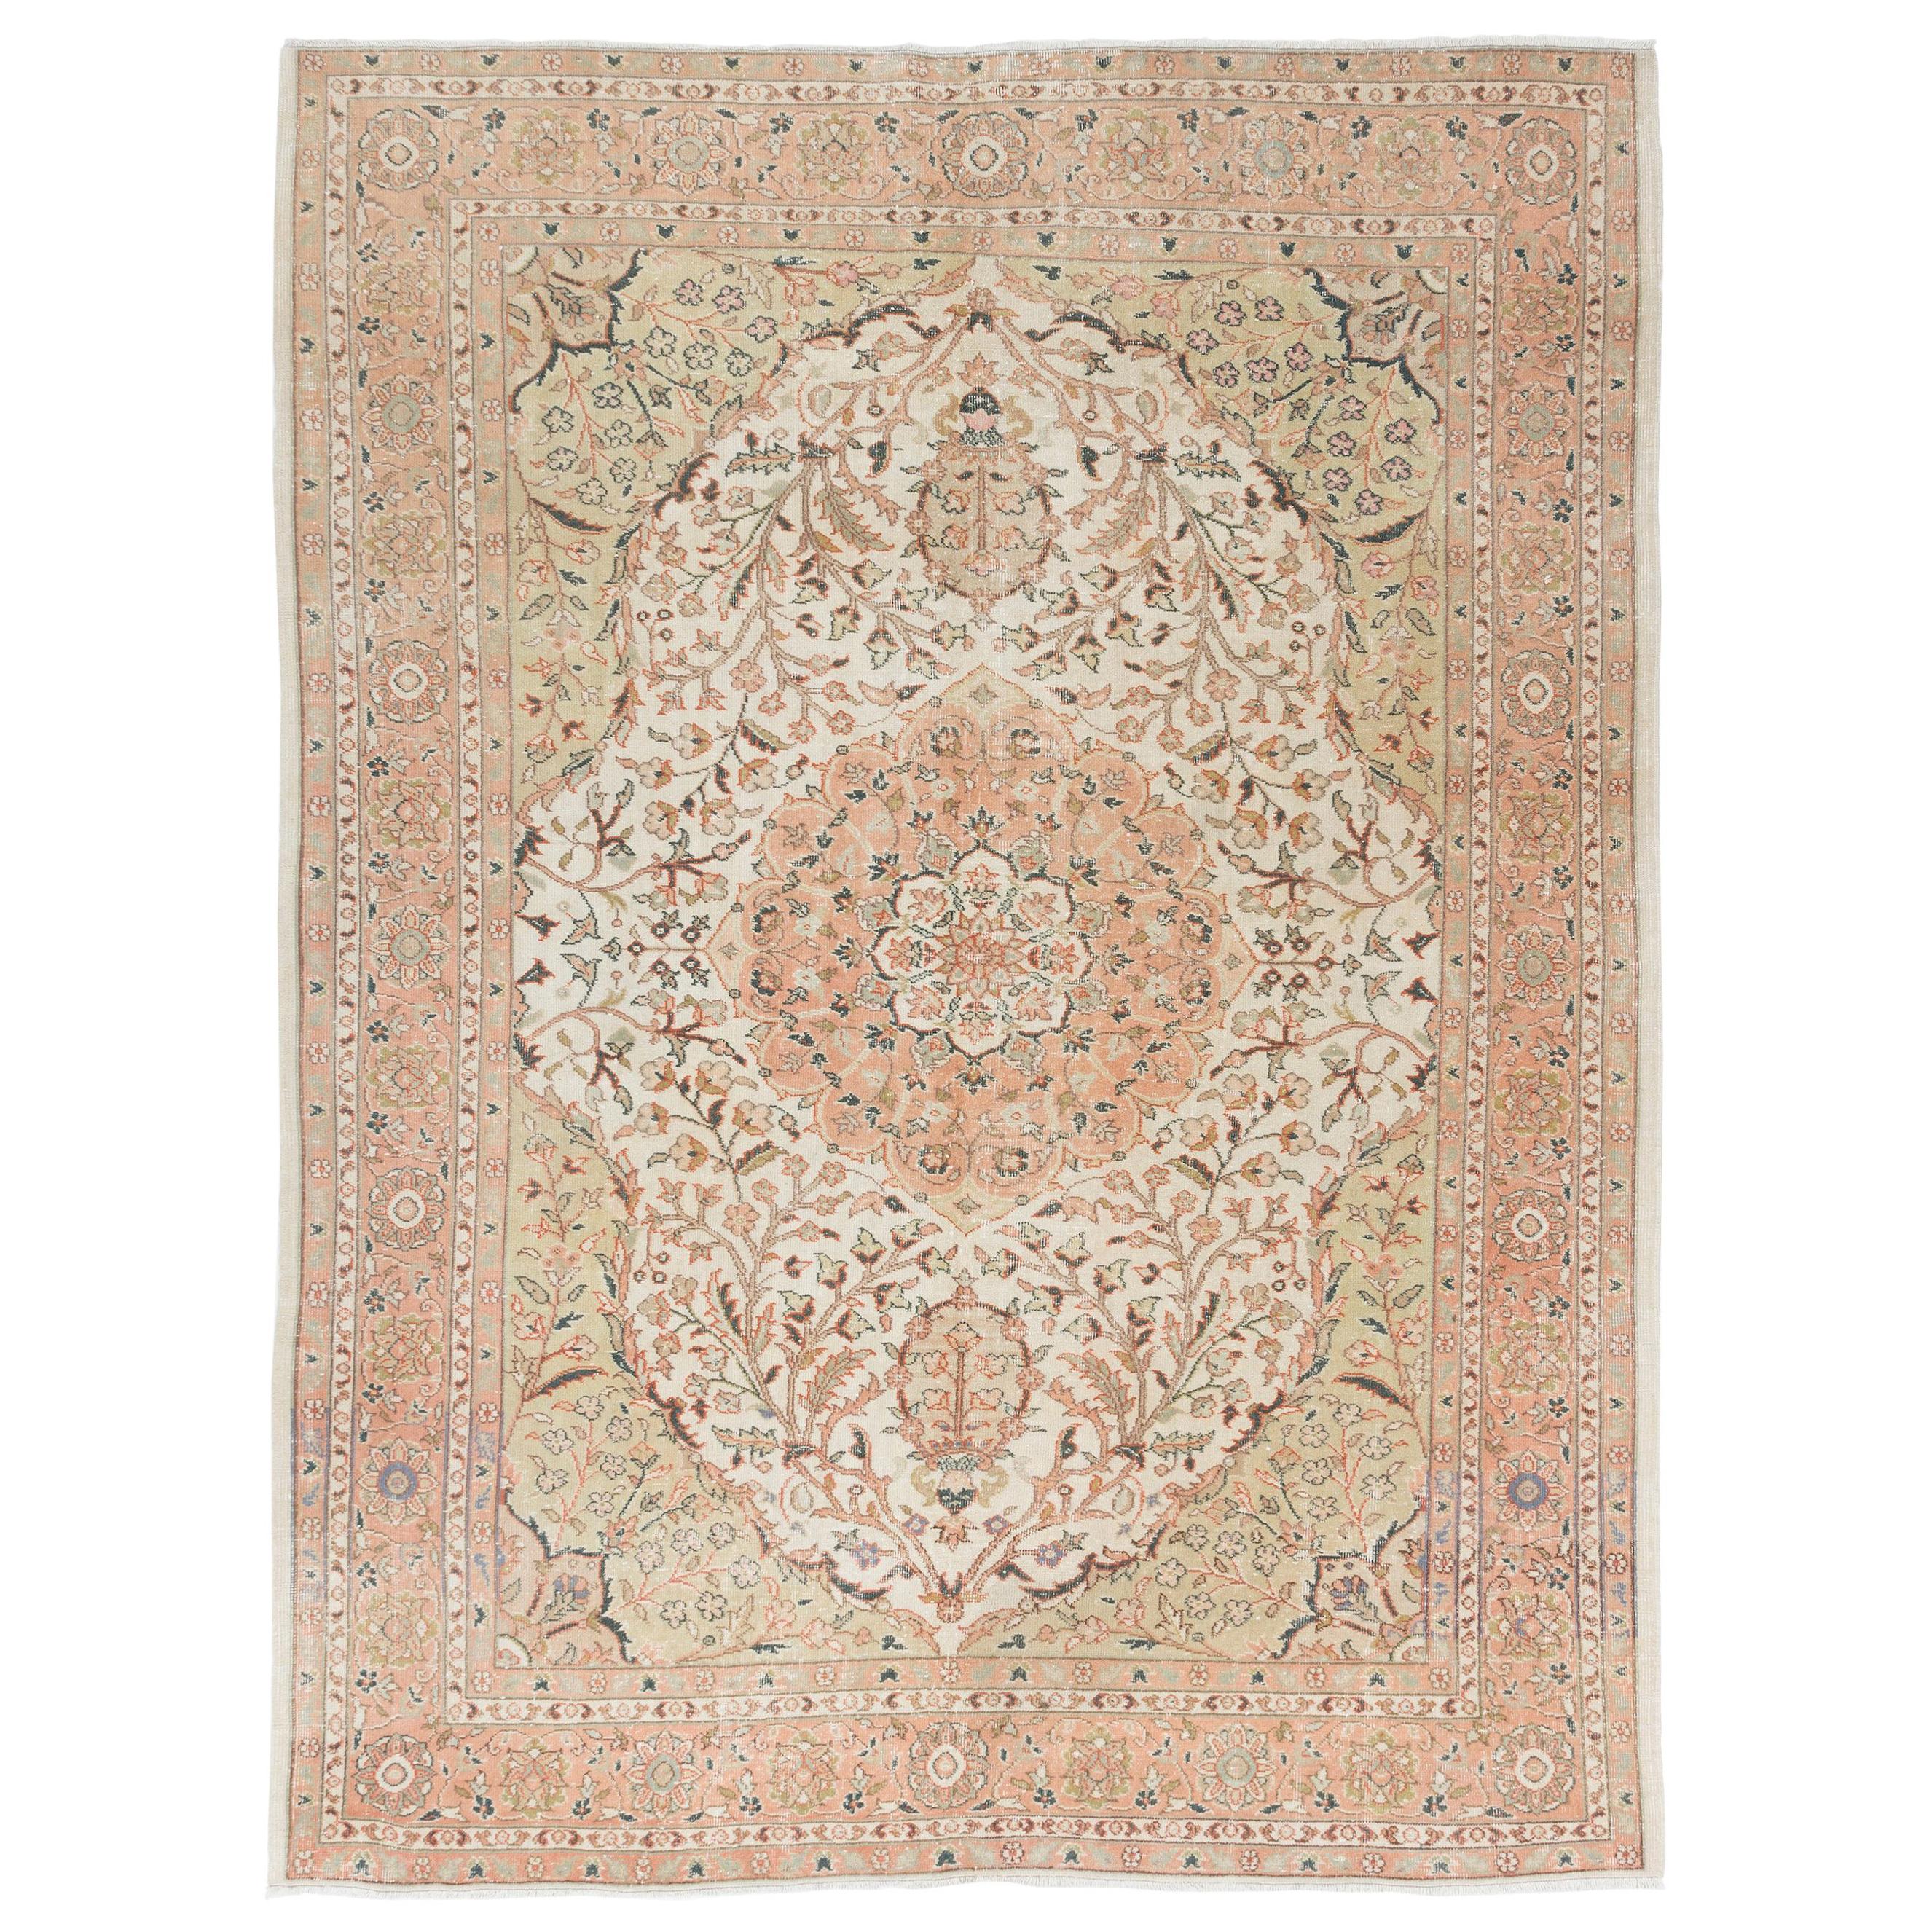 7.2x9.4 Ft One of a Kind Hand-knotted Fine Vintage Ladik Wool Rug in Soft Colors For Sale